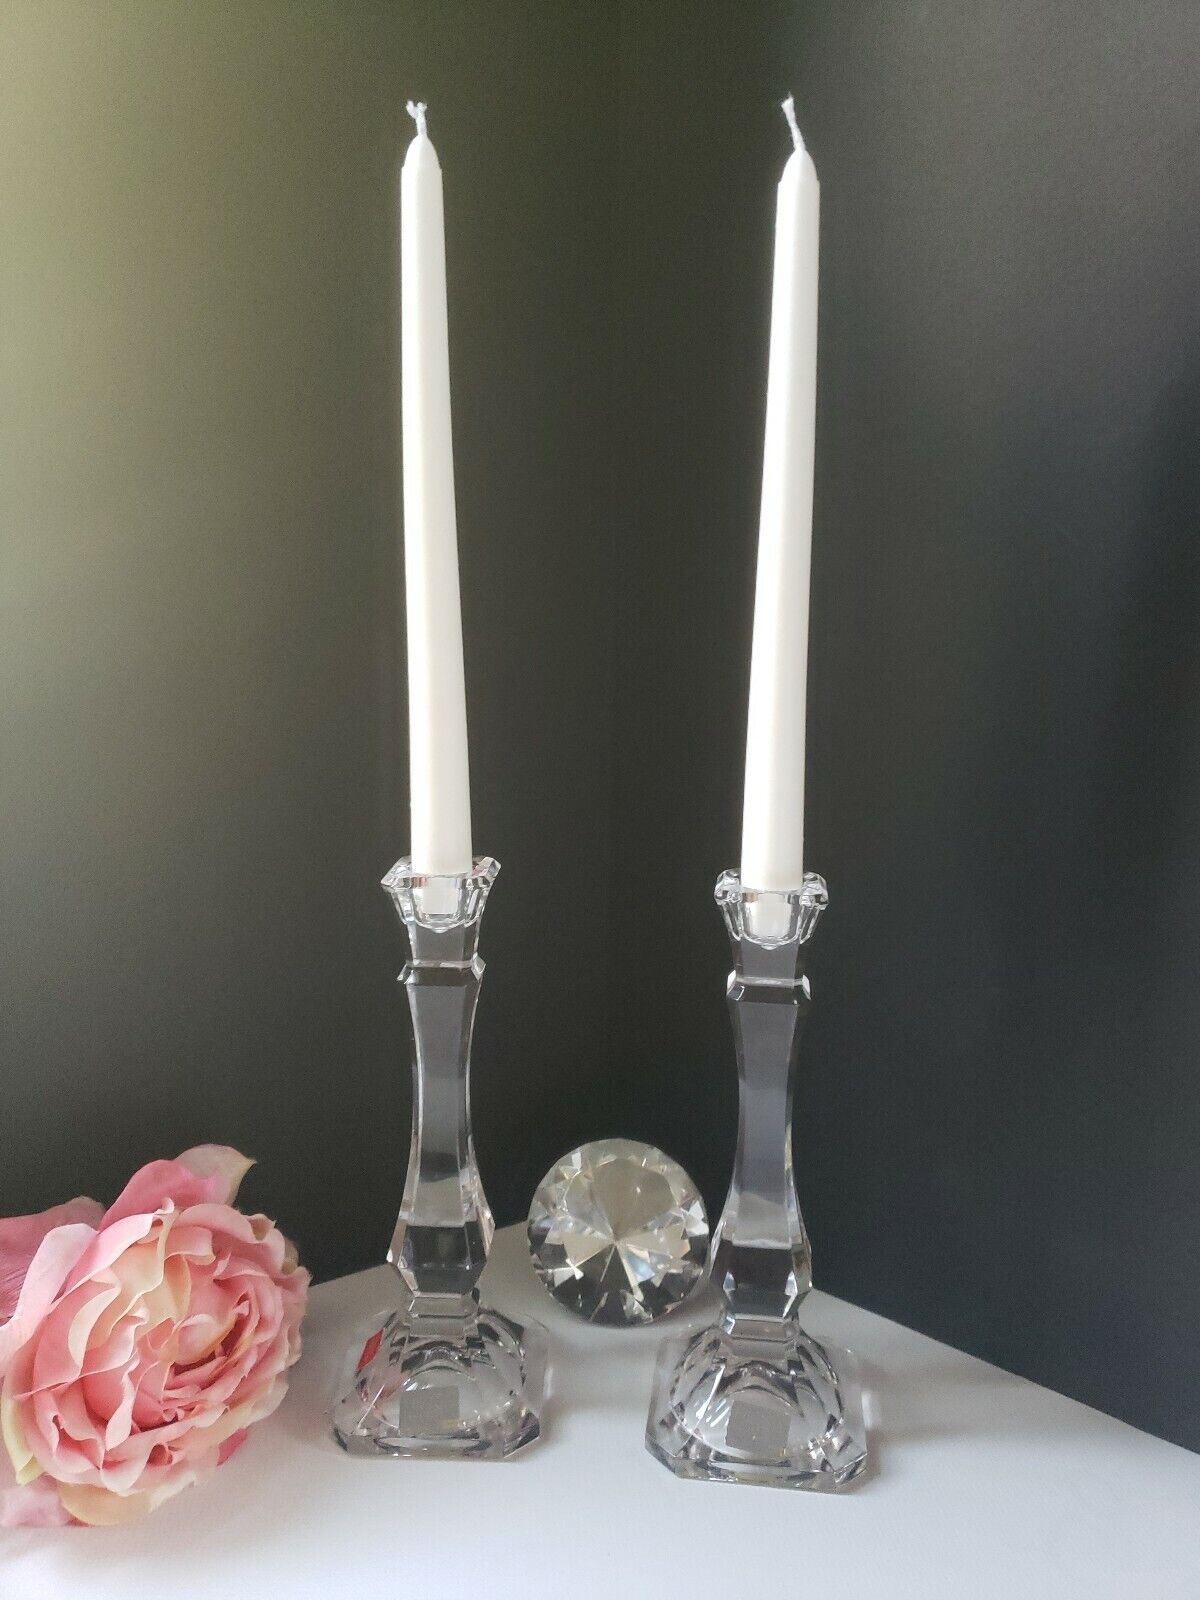 Mikasa - Pair of Lead Crystal Candle Holders  Made in Austria - NEW/DISPLAY ITEM Mikasa - фотография #2